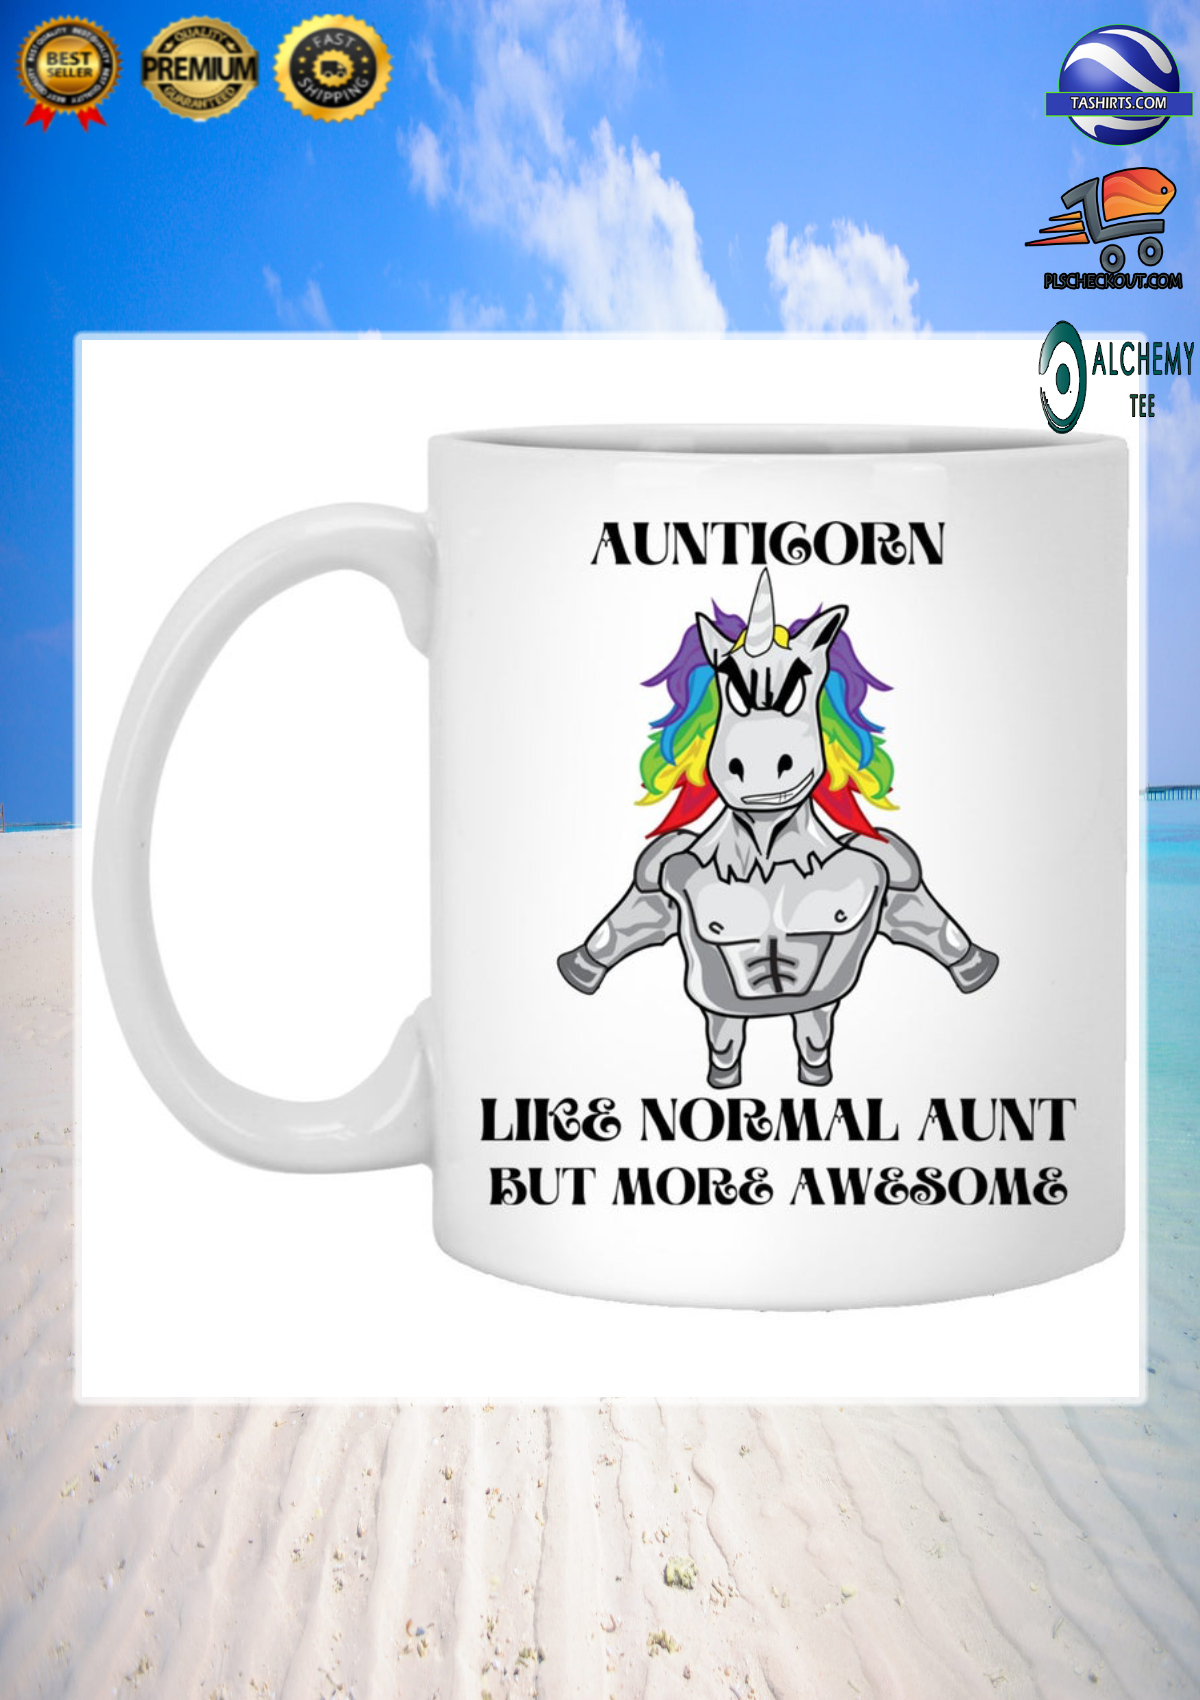 Aunticorn like normal aunt but more awesome mug